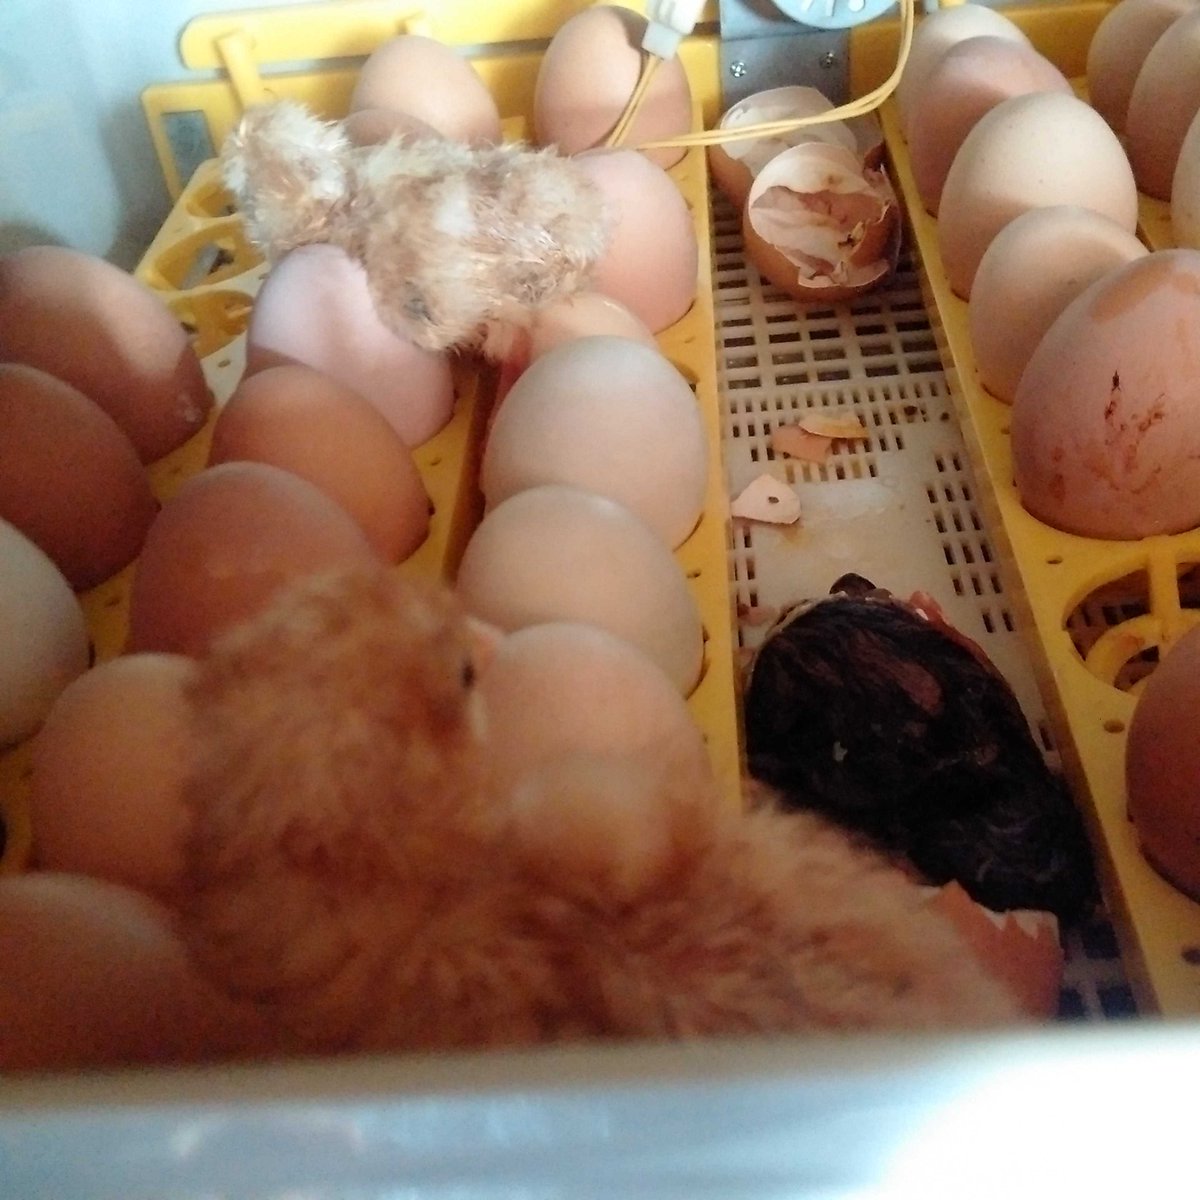 They're busting loose! #chickchick #newfoundlandlife #babybirds